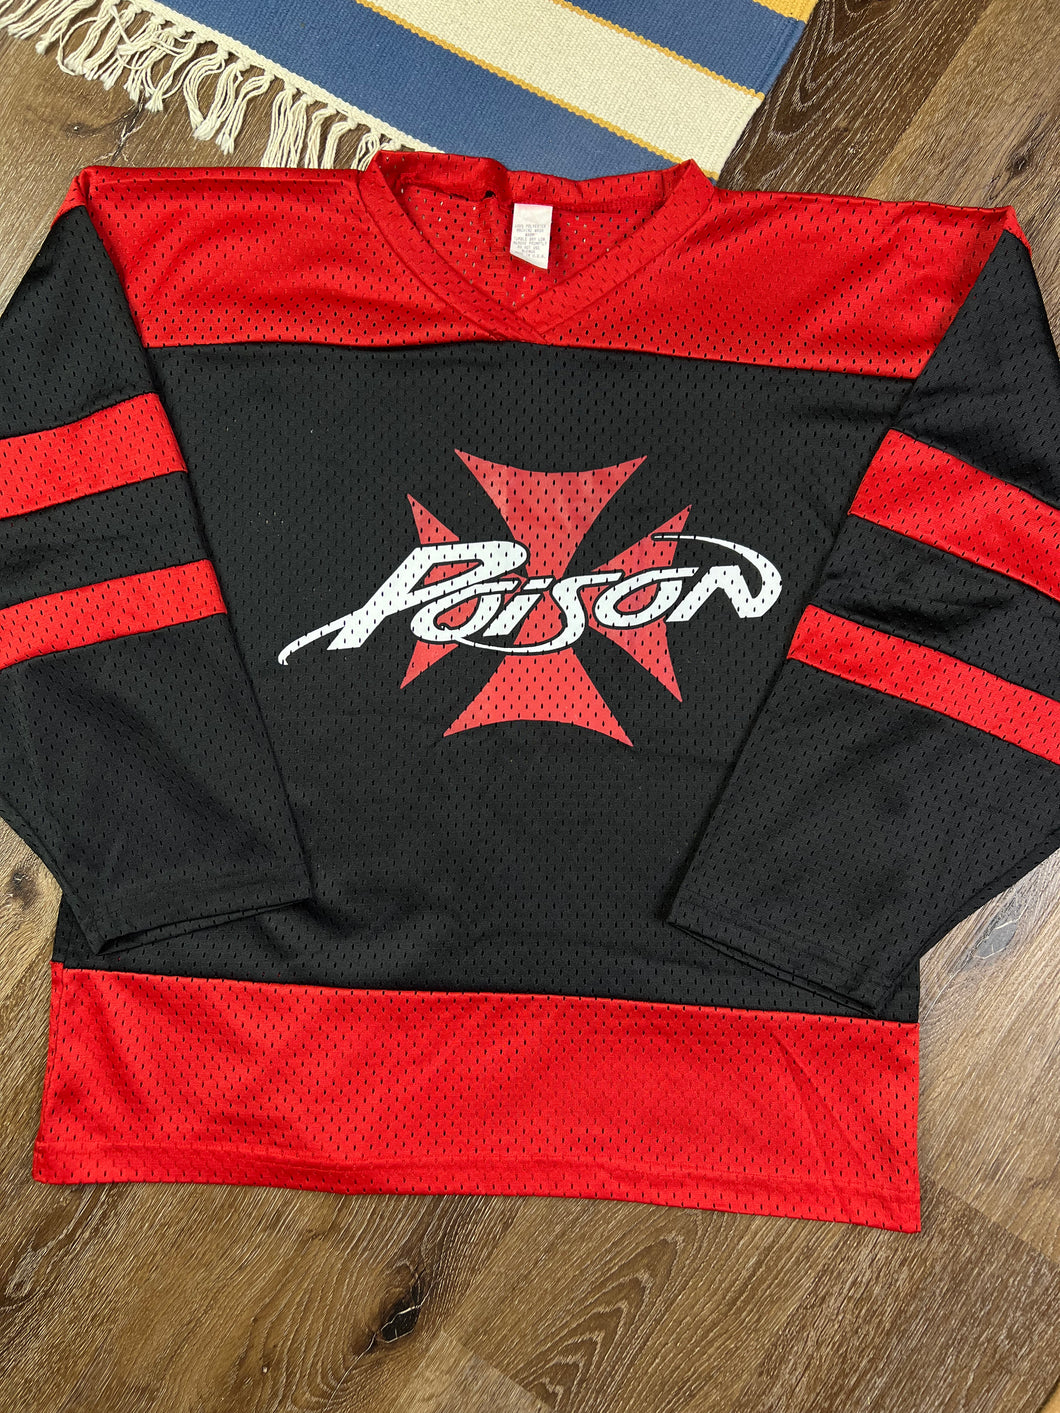 Vintage 2002 Poison Band Jersey (S/M)